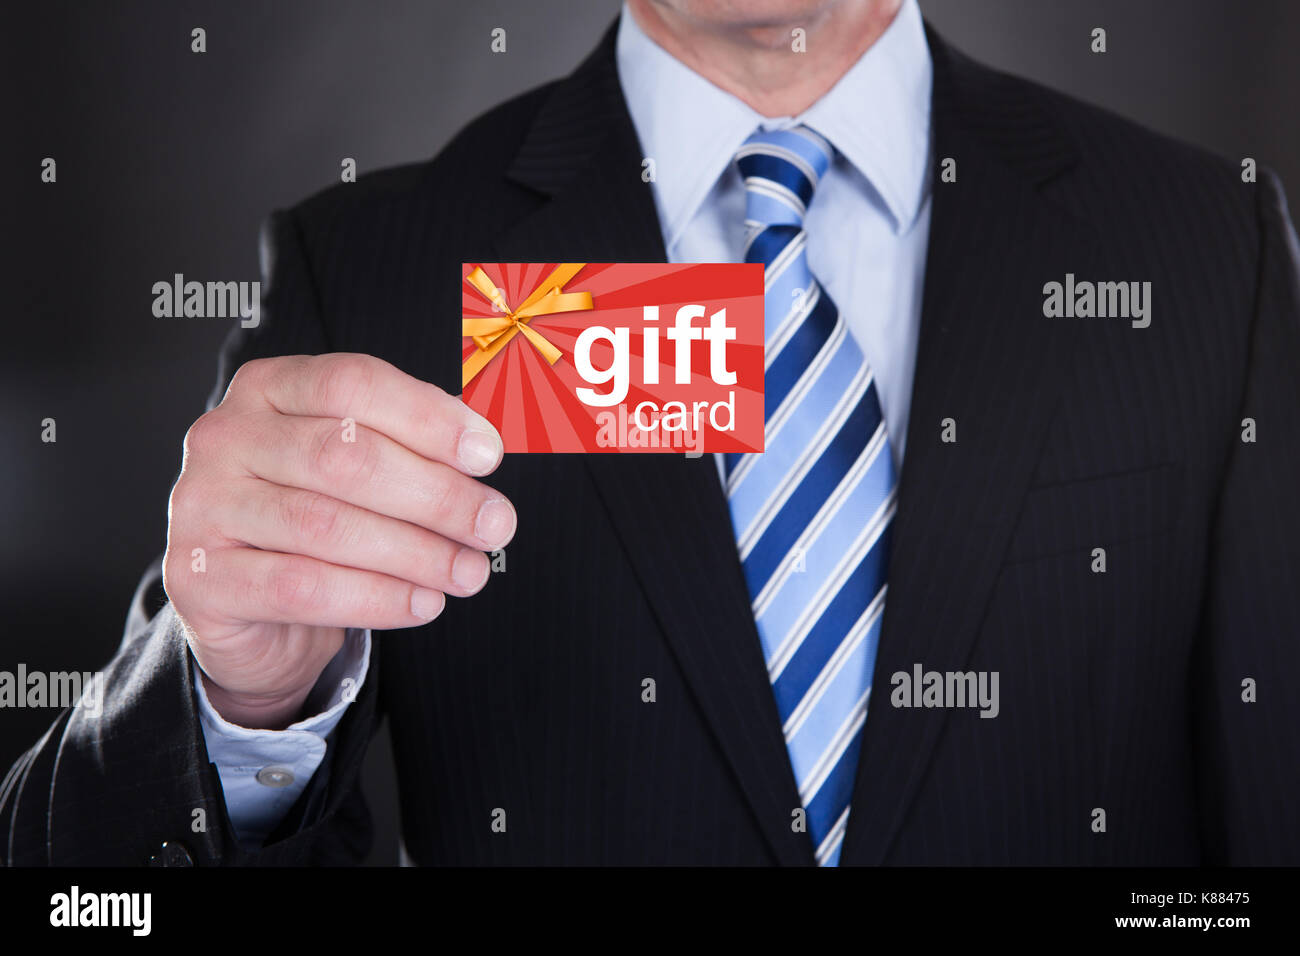 Close-up Of Businessman Holding Gift Card Over Black Background Stock Photo